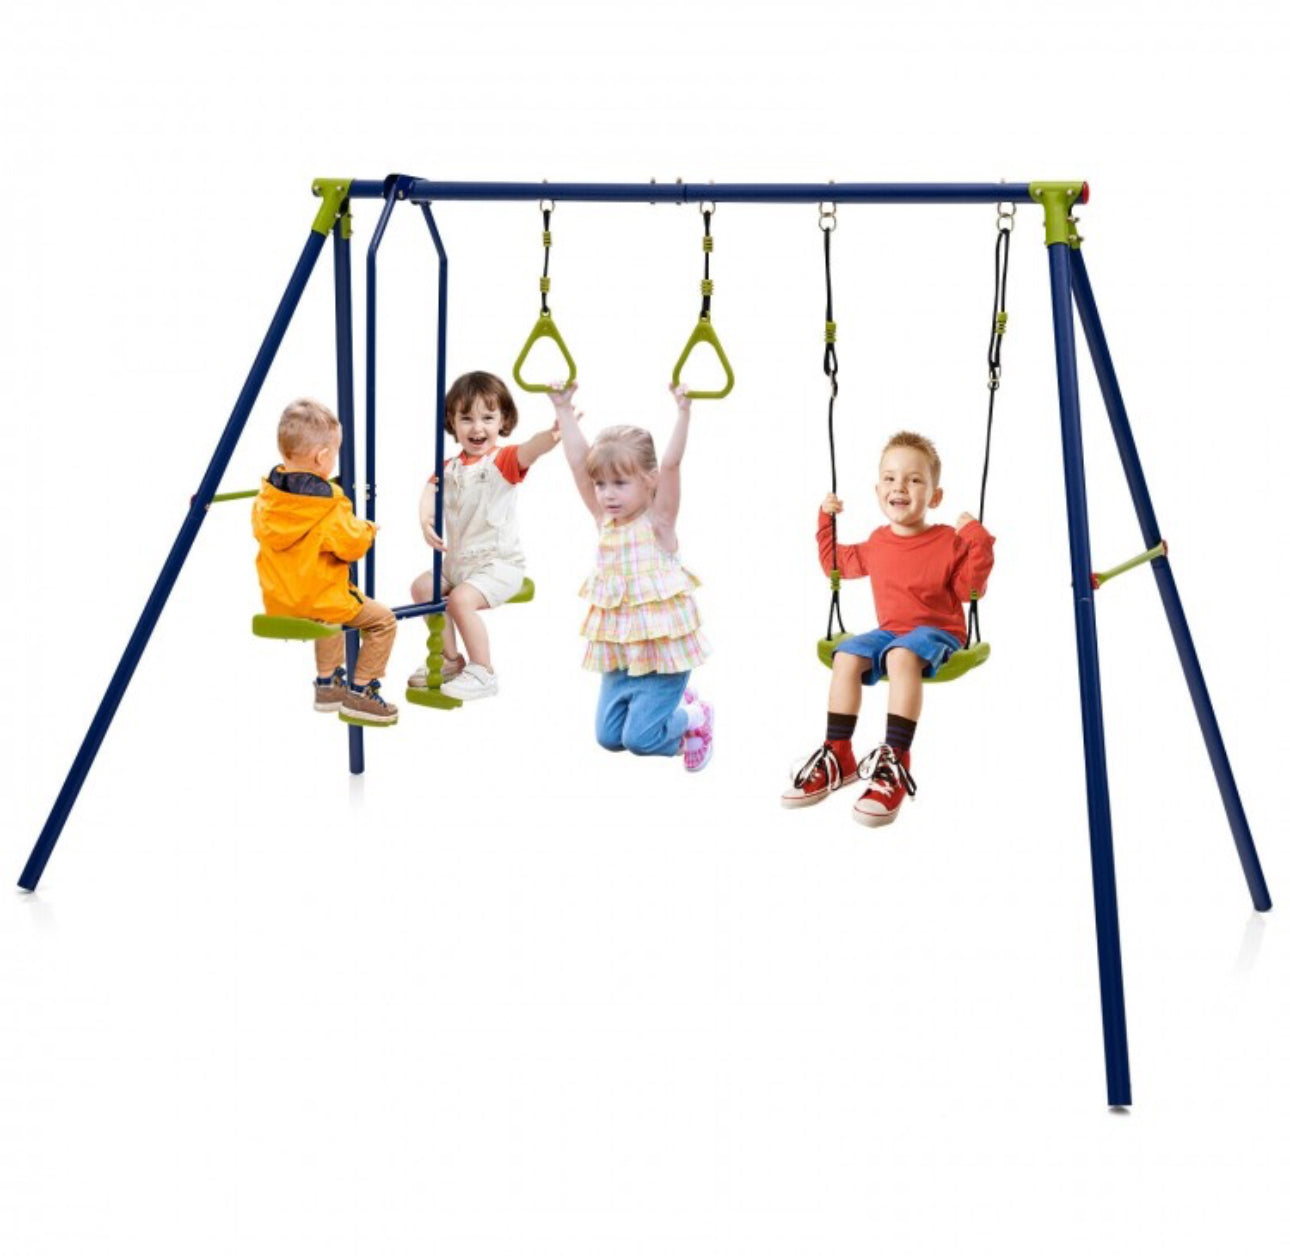 Super Fun Heavy Duty 3-in-1 Outdoor Playground Set for Ages 3-10 | Easy Install | Swing | Gym Rings | 2 Person Glider